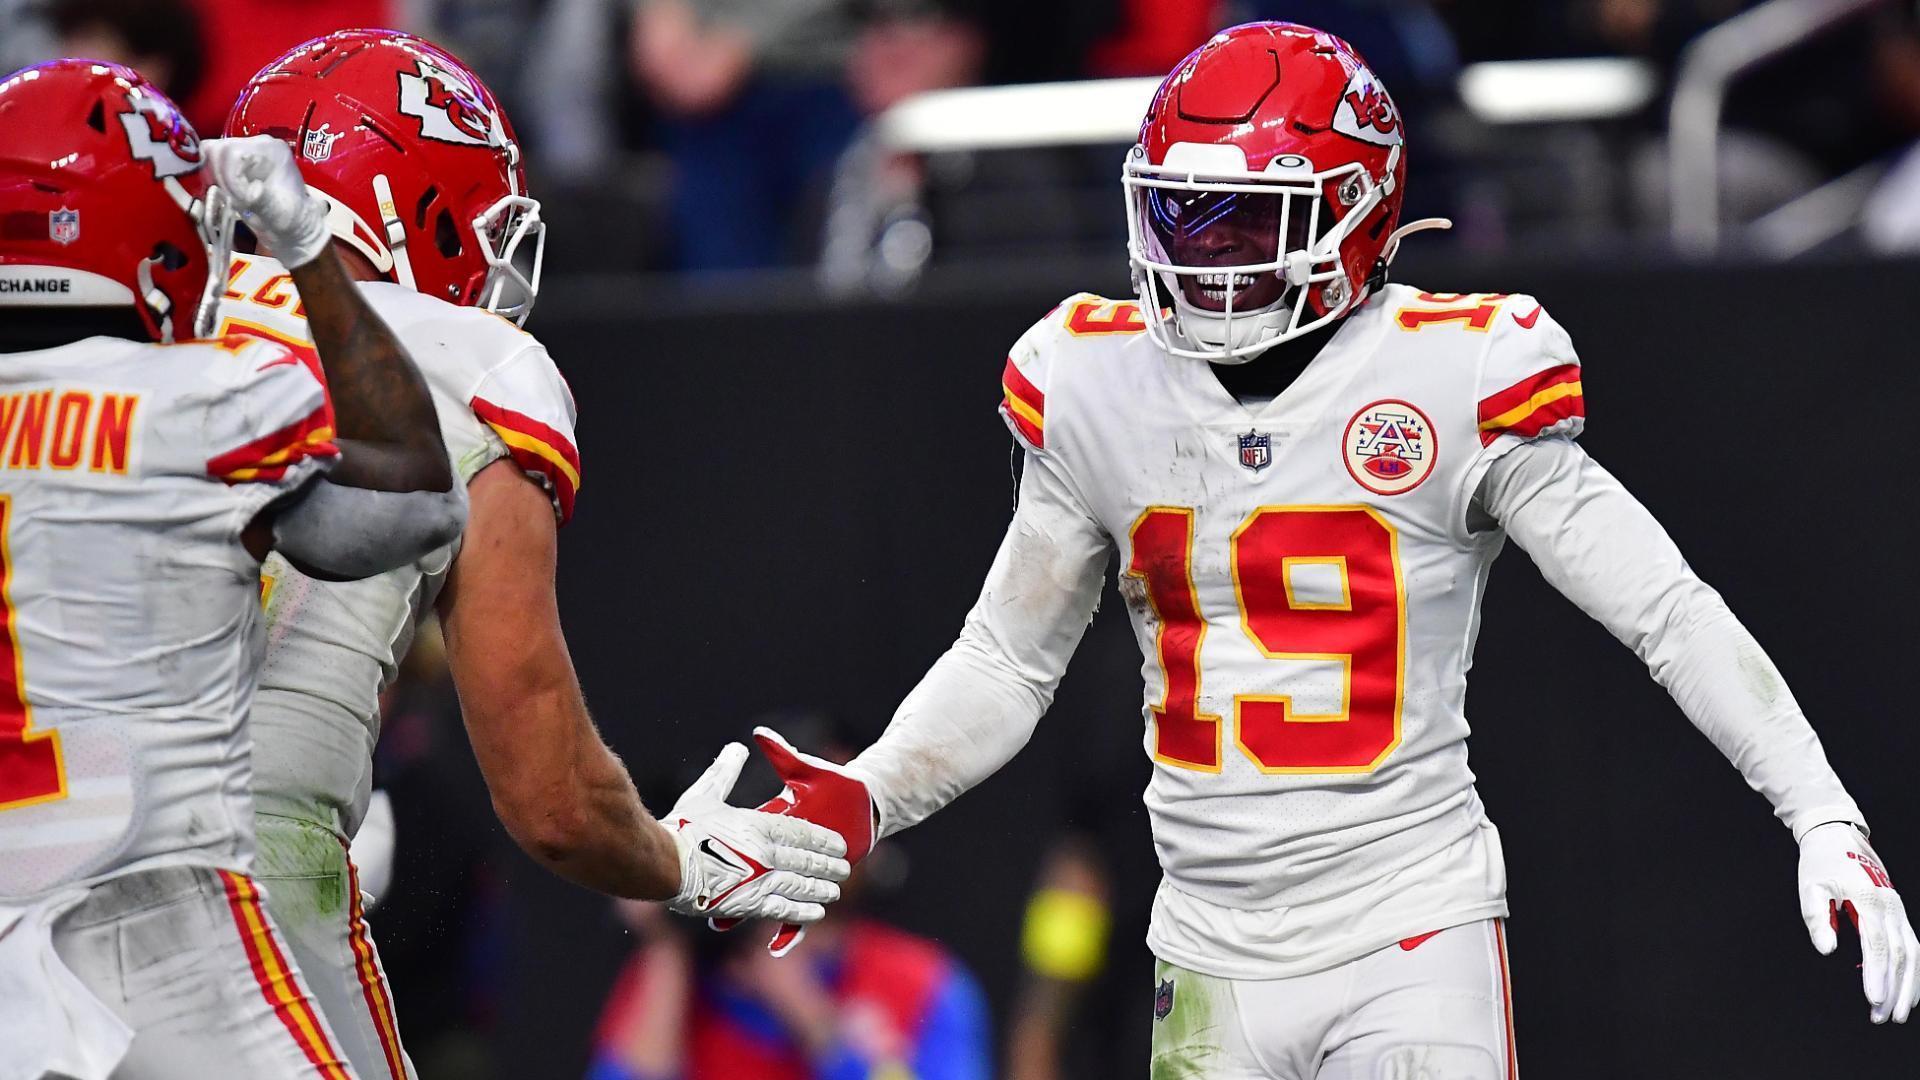 Chiefs vs. Raiders: Postgame Facts and Stats